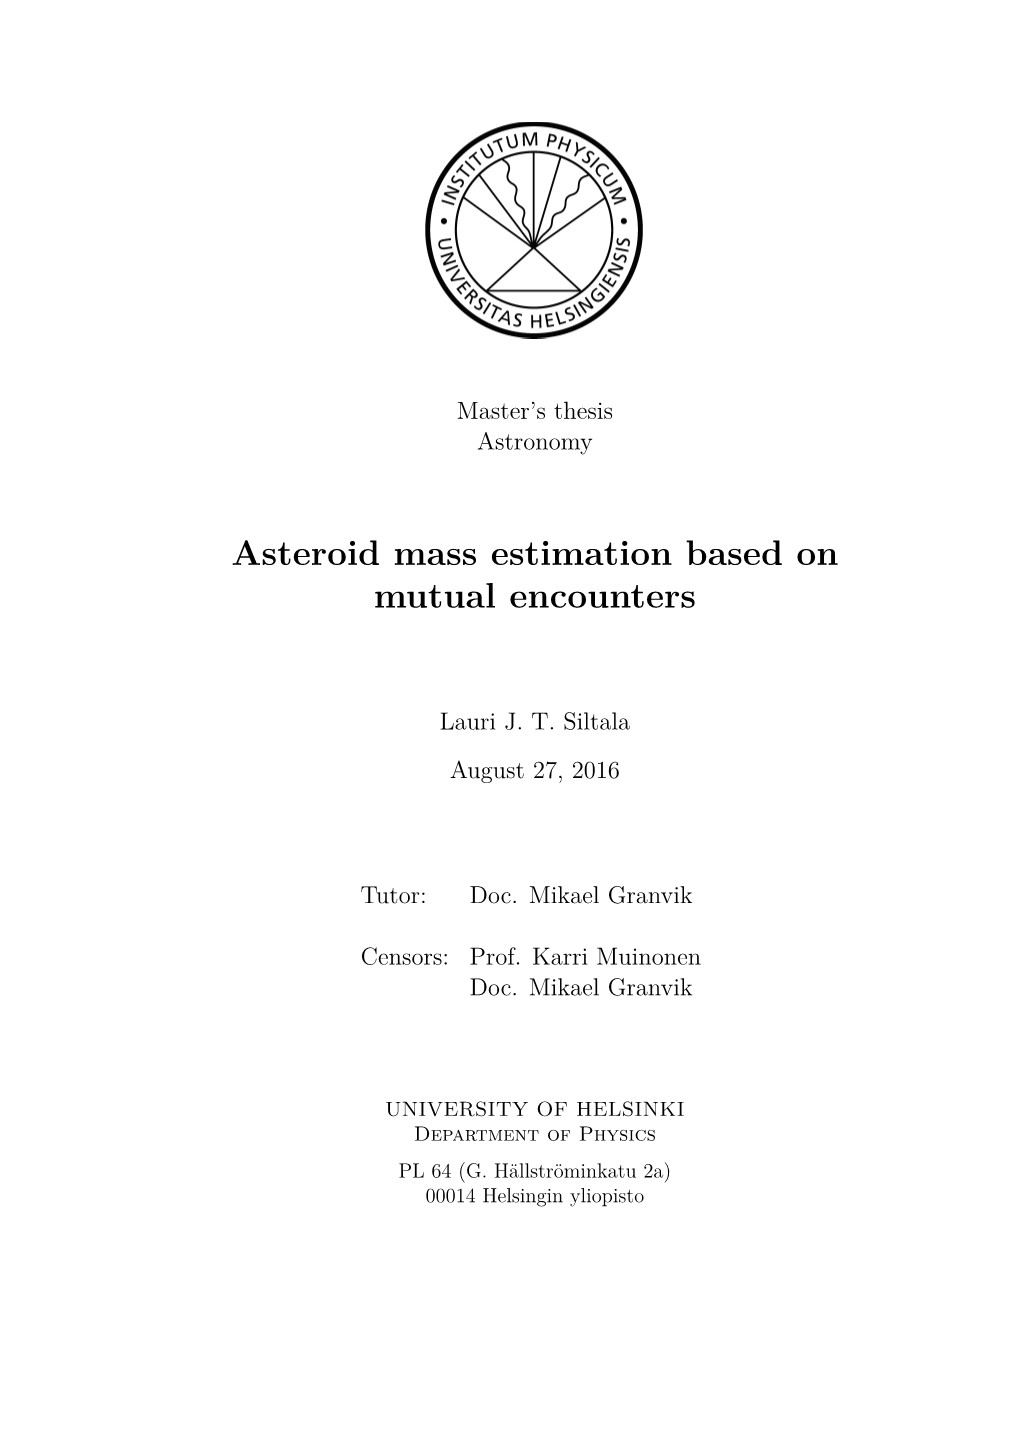 Asteroid Mass Estimation Based on Mutual Encounters